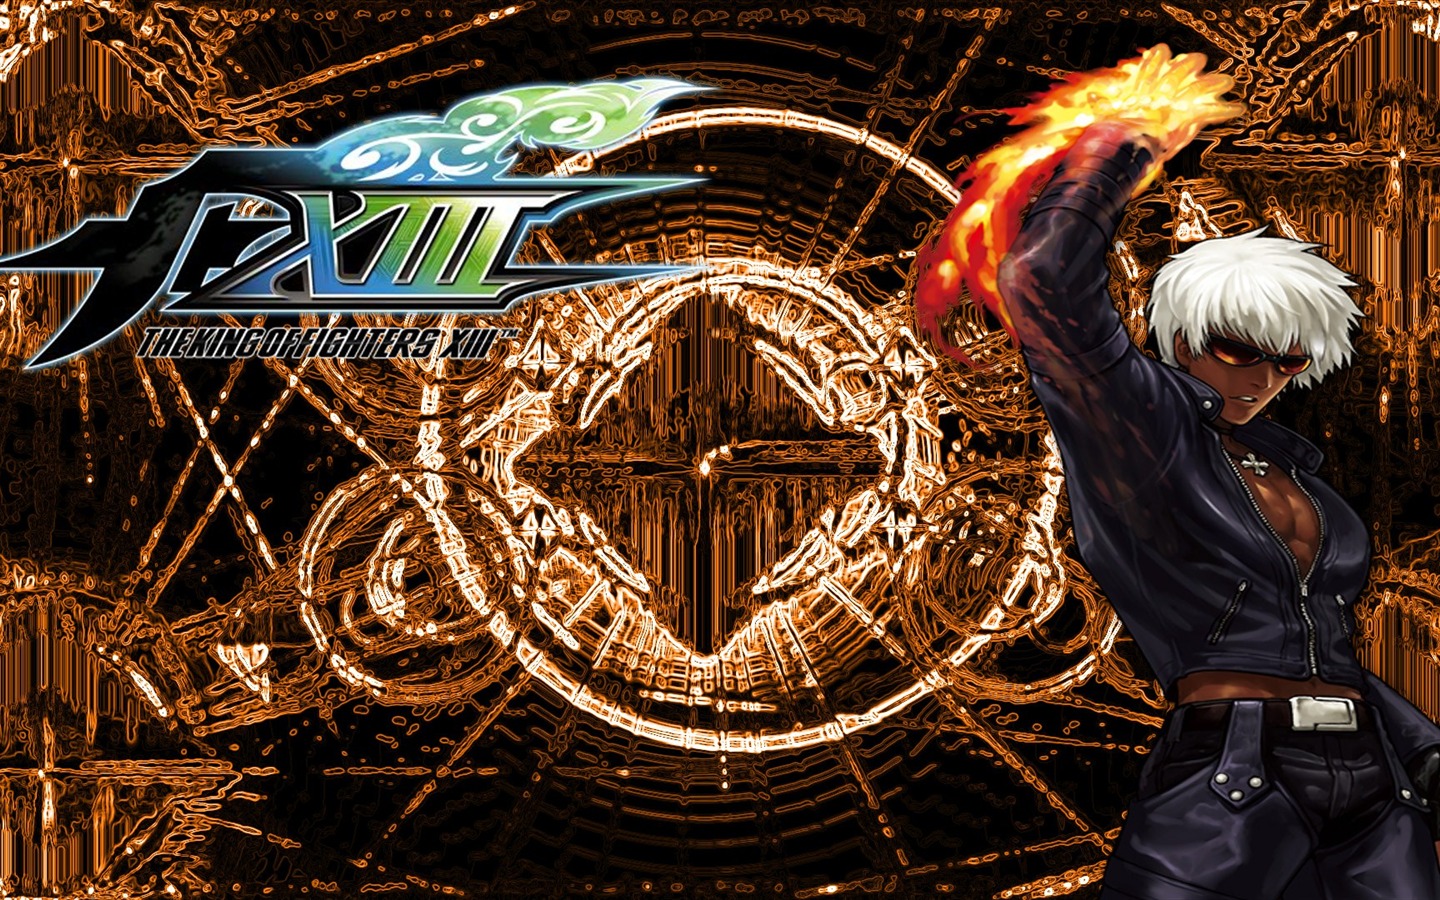 Le roi de wallpapers Fighters XIII #8 - 1440x900